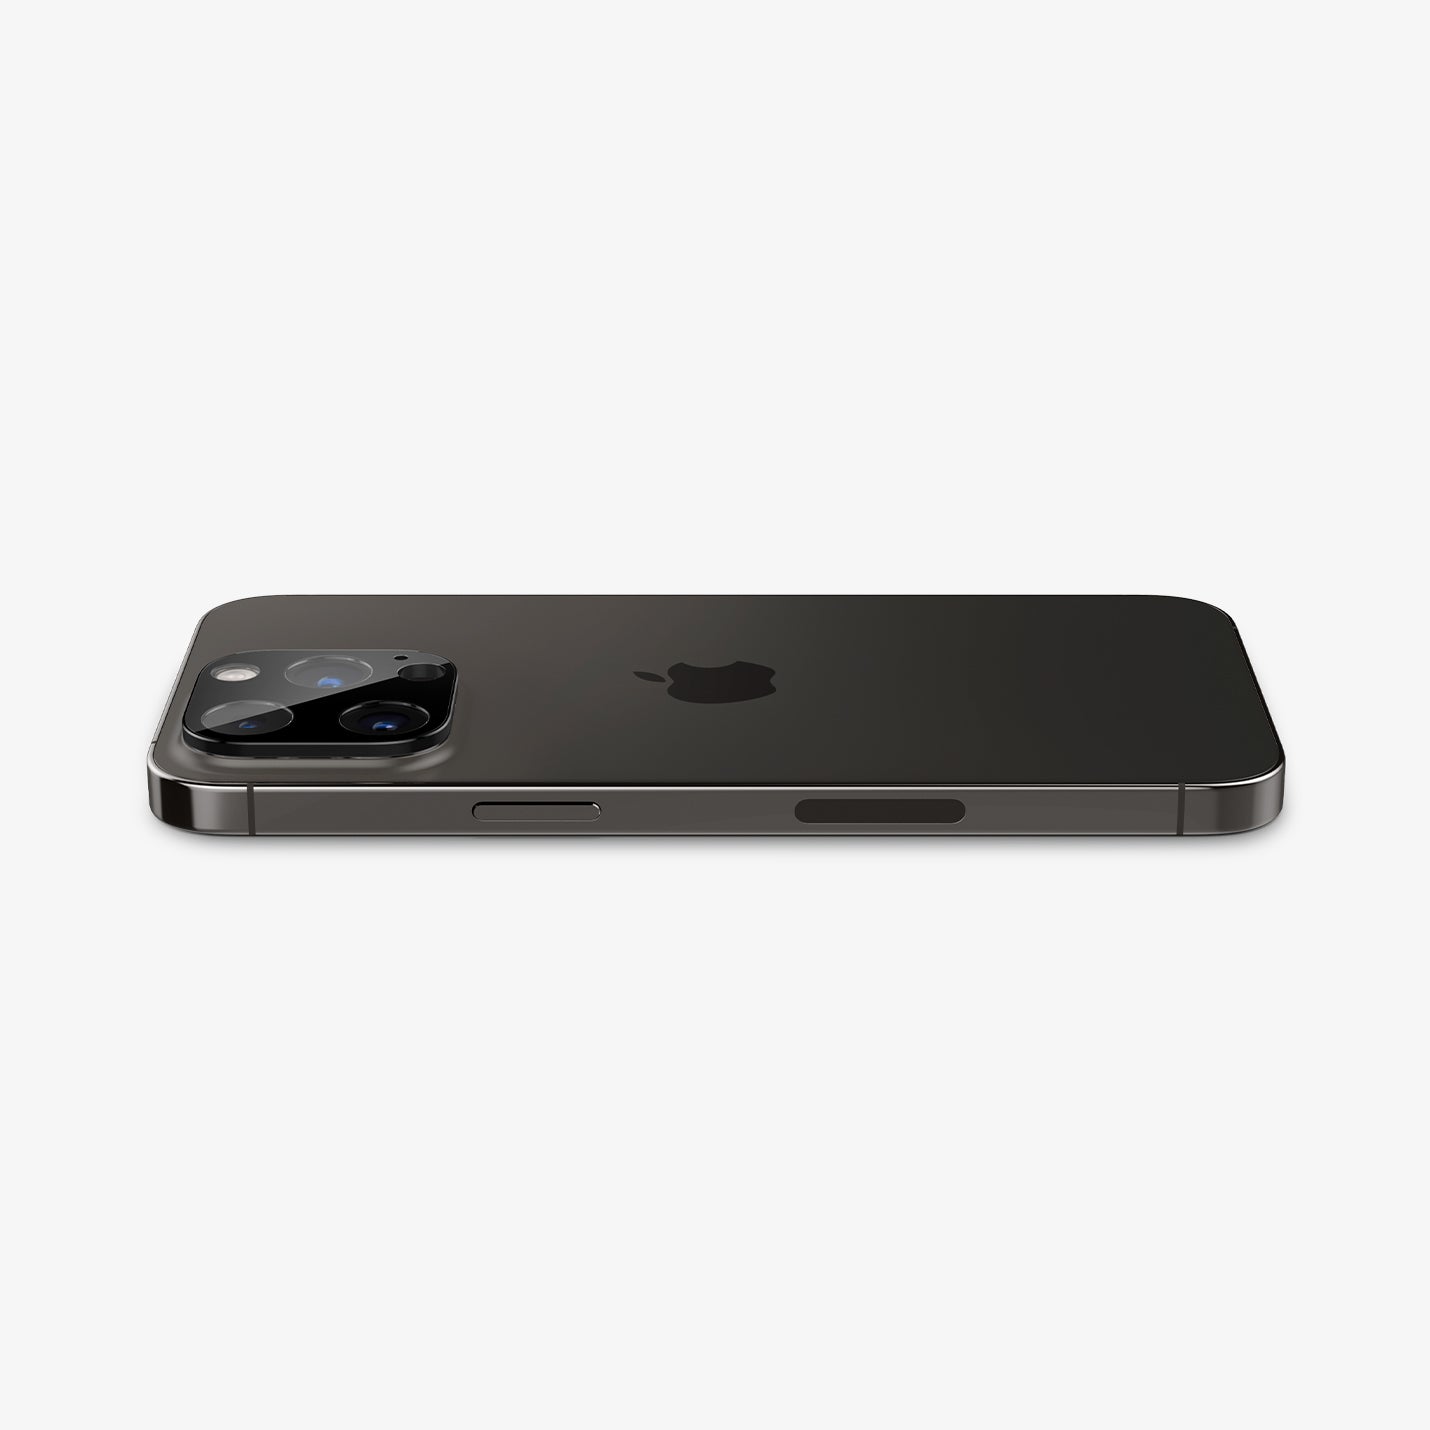 AGL06913 - iPhone 14 Pro / 14 Pro Max Optik Lens Protector in black showing the back and side with device laying flat